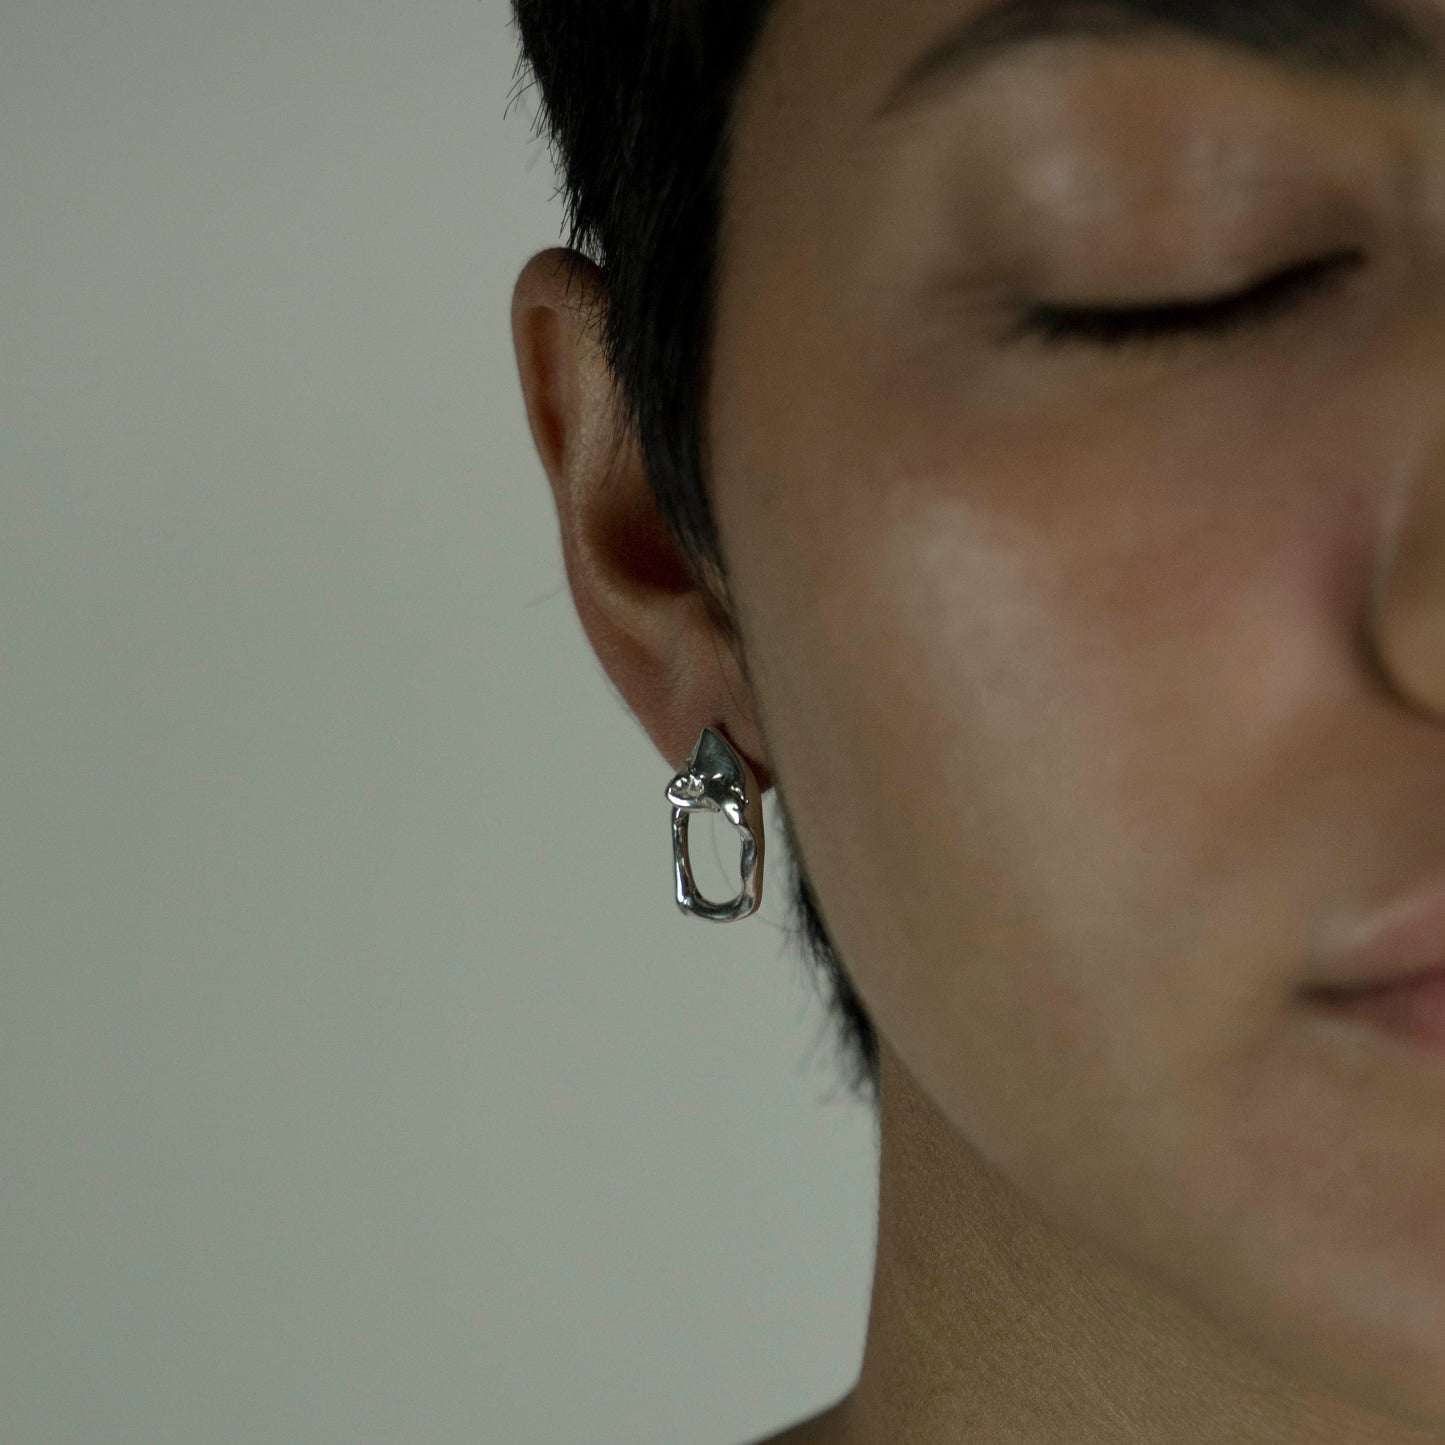 Square earrings are handcrafted and made from sterling silver 925